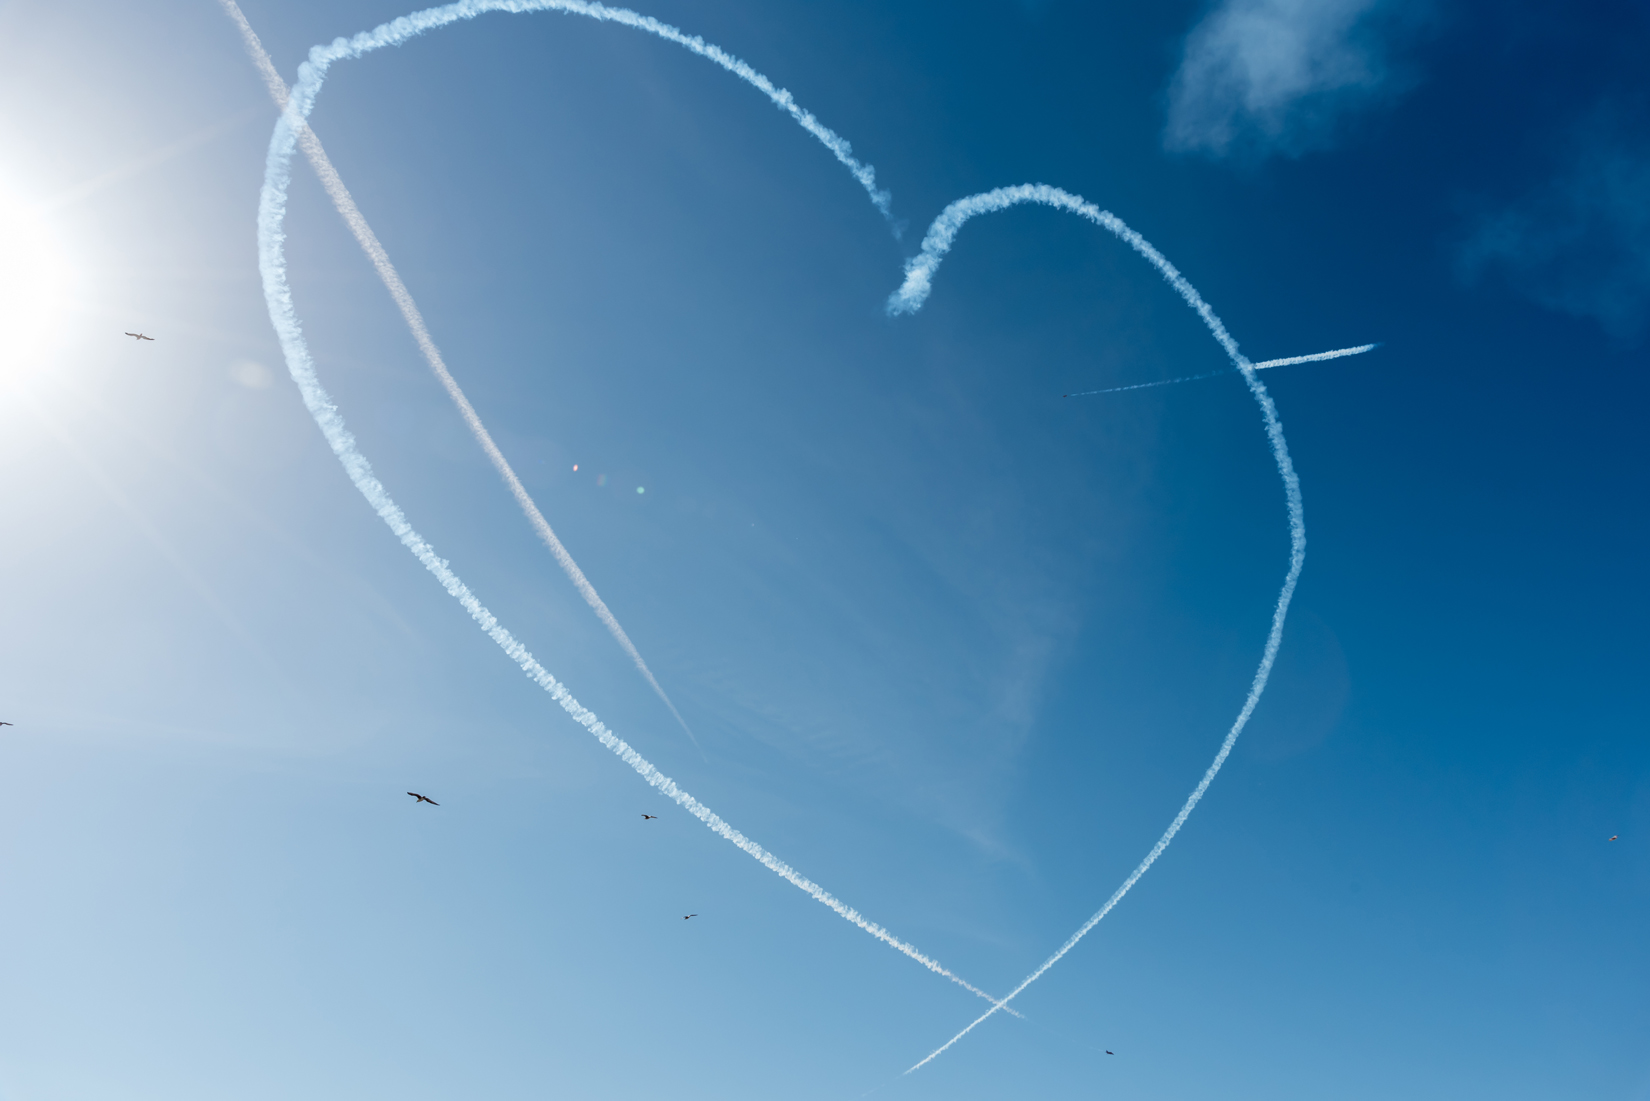 The Red Arrows' Heart and Spear display